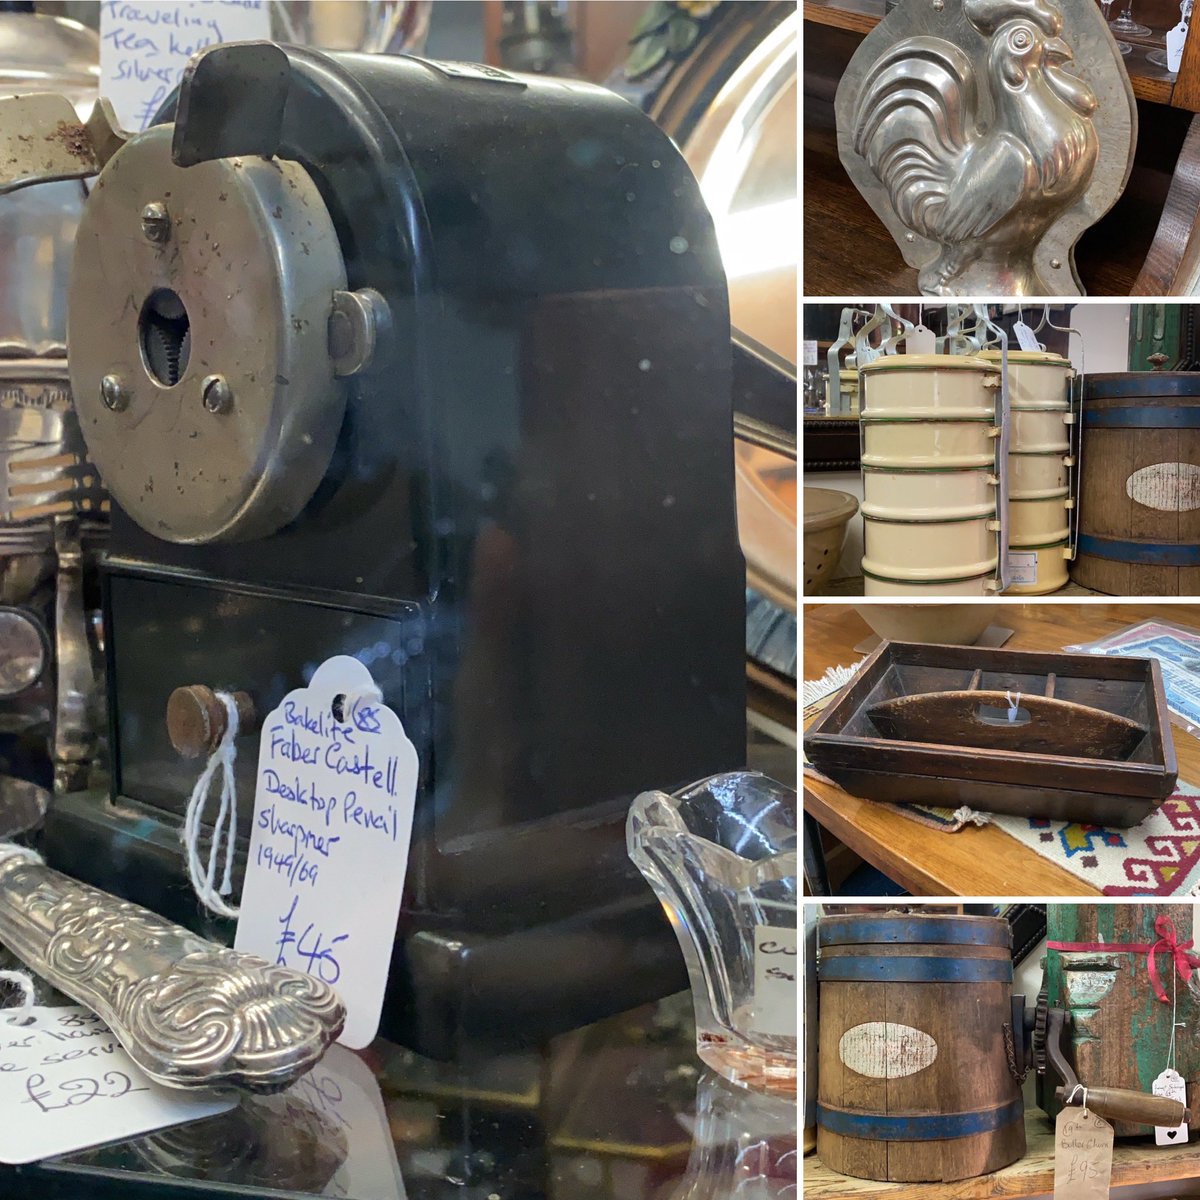 Unit 85 always has an eclectic mix of stock with a vast majority coming from Europe. They have everything from amazing chippy furniture to French vintage cookware. Open until 5pm #europeanfurniture #frenchhomeware #chippyfurniture #lighting #tifinbox #vintagechocolatemoulds